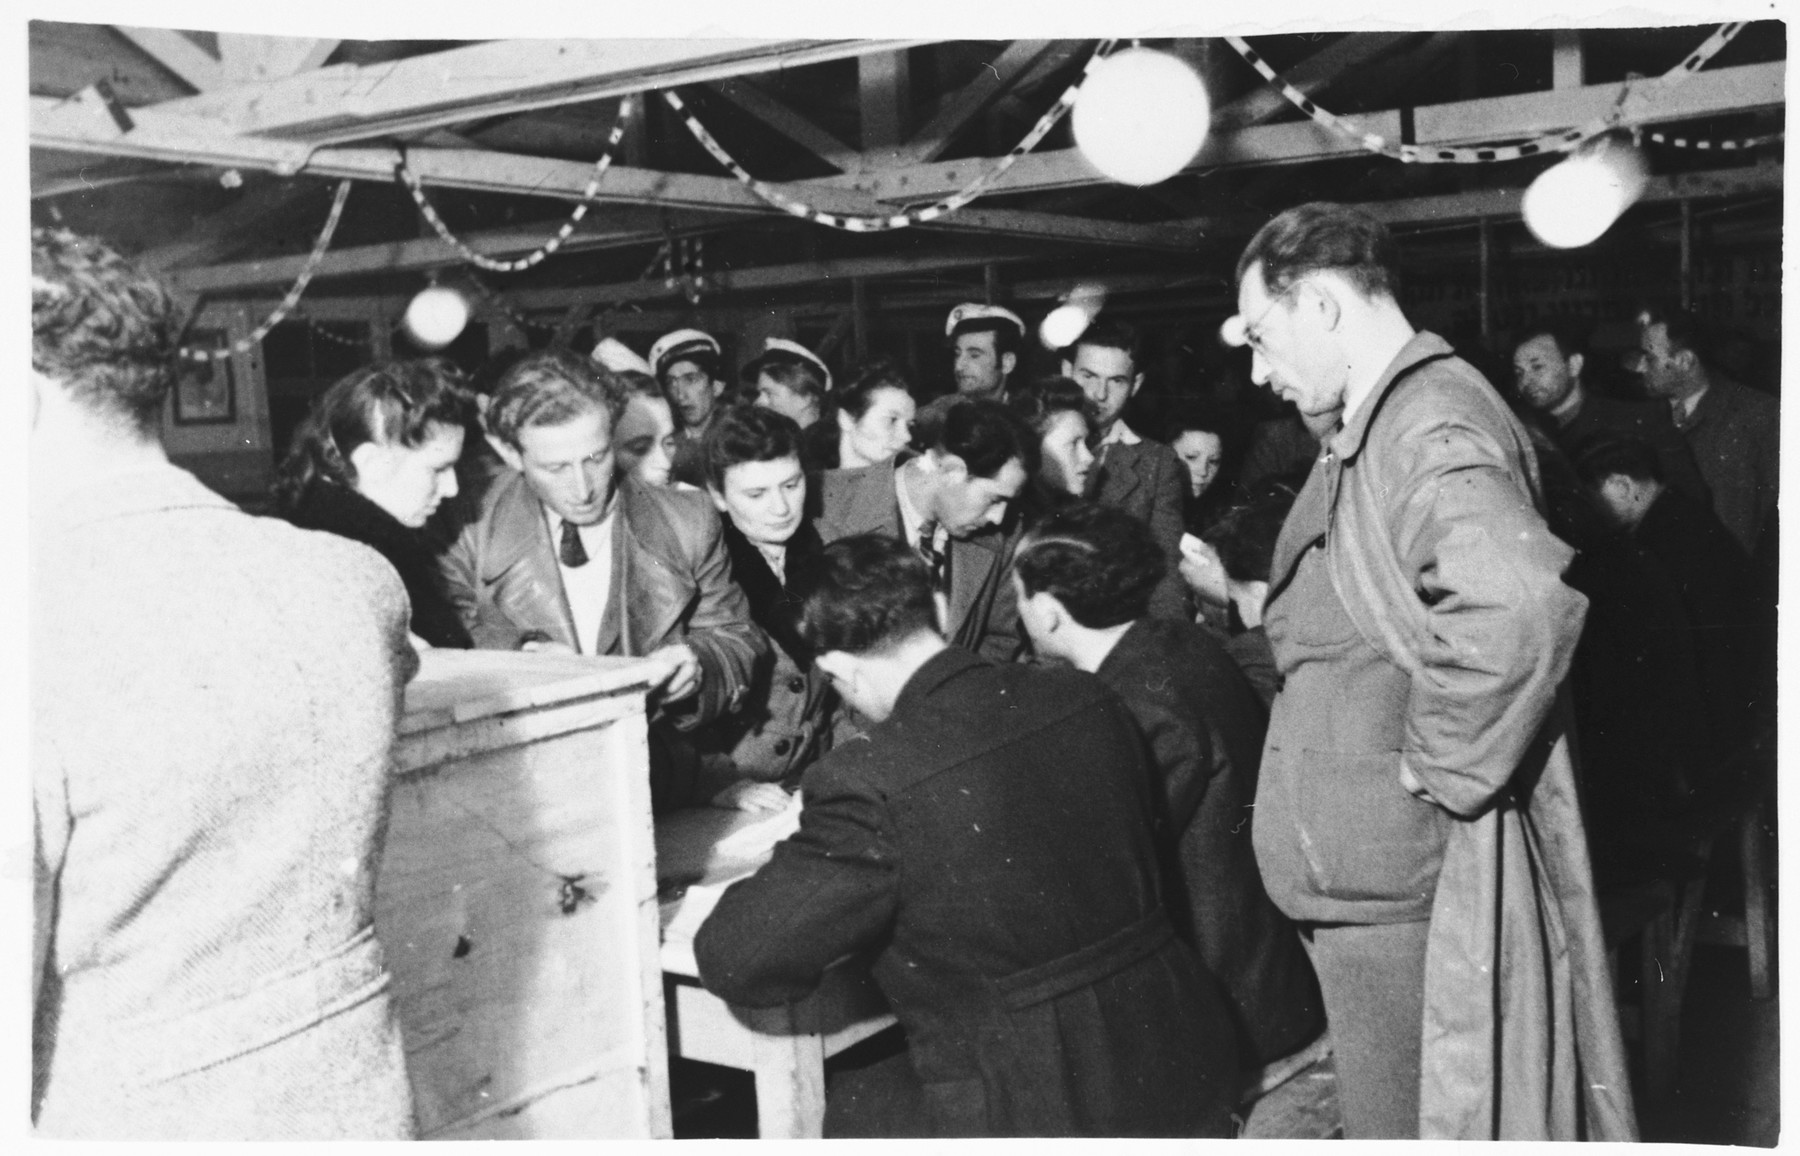 Men and women file past a table to vote in elections in the Zeilsheim displaced persons' camp.

Among those pictured is Abraham Poznanski, in the center of the photo, looking down at the table, in profile.  His wife, Hanka (Anna) Poznanski is standing behind him, looking off to the right.